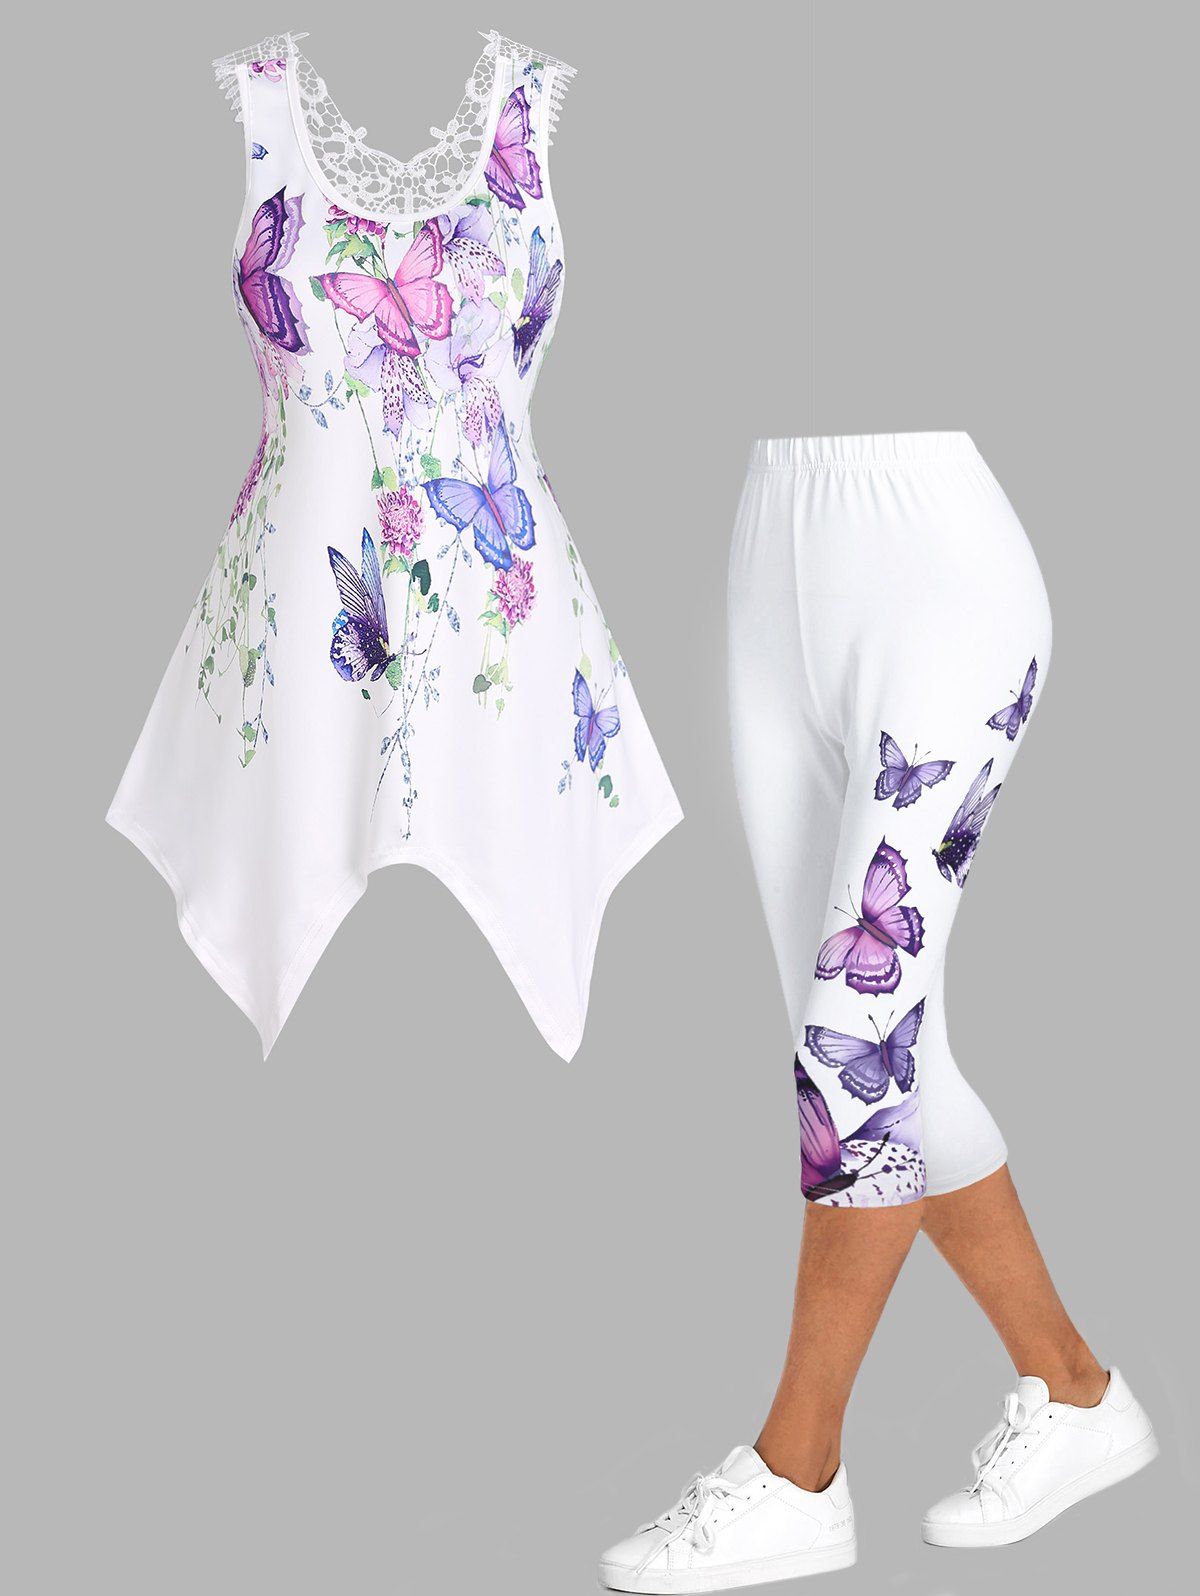 Butterfly Flower Print Lace Insert Asymmetric Tank Top And High Waist Capri Leggings Summer Outfit - WHITE S